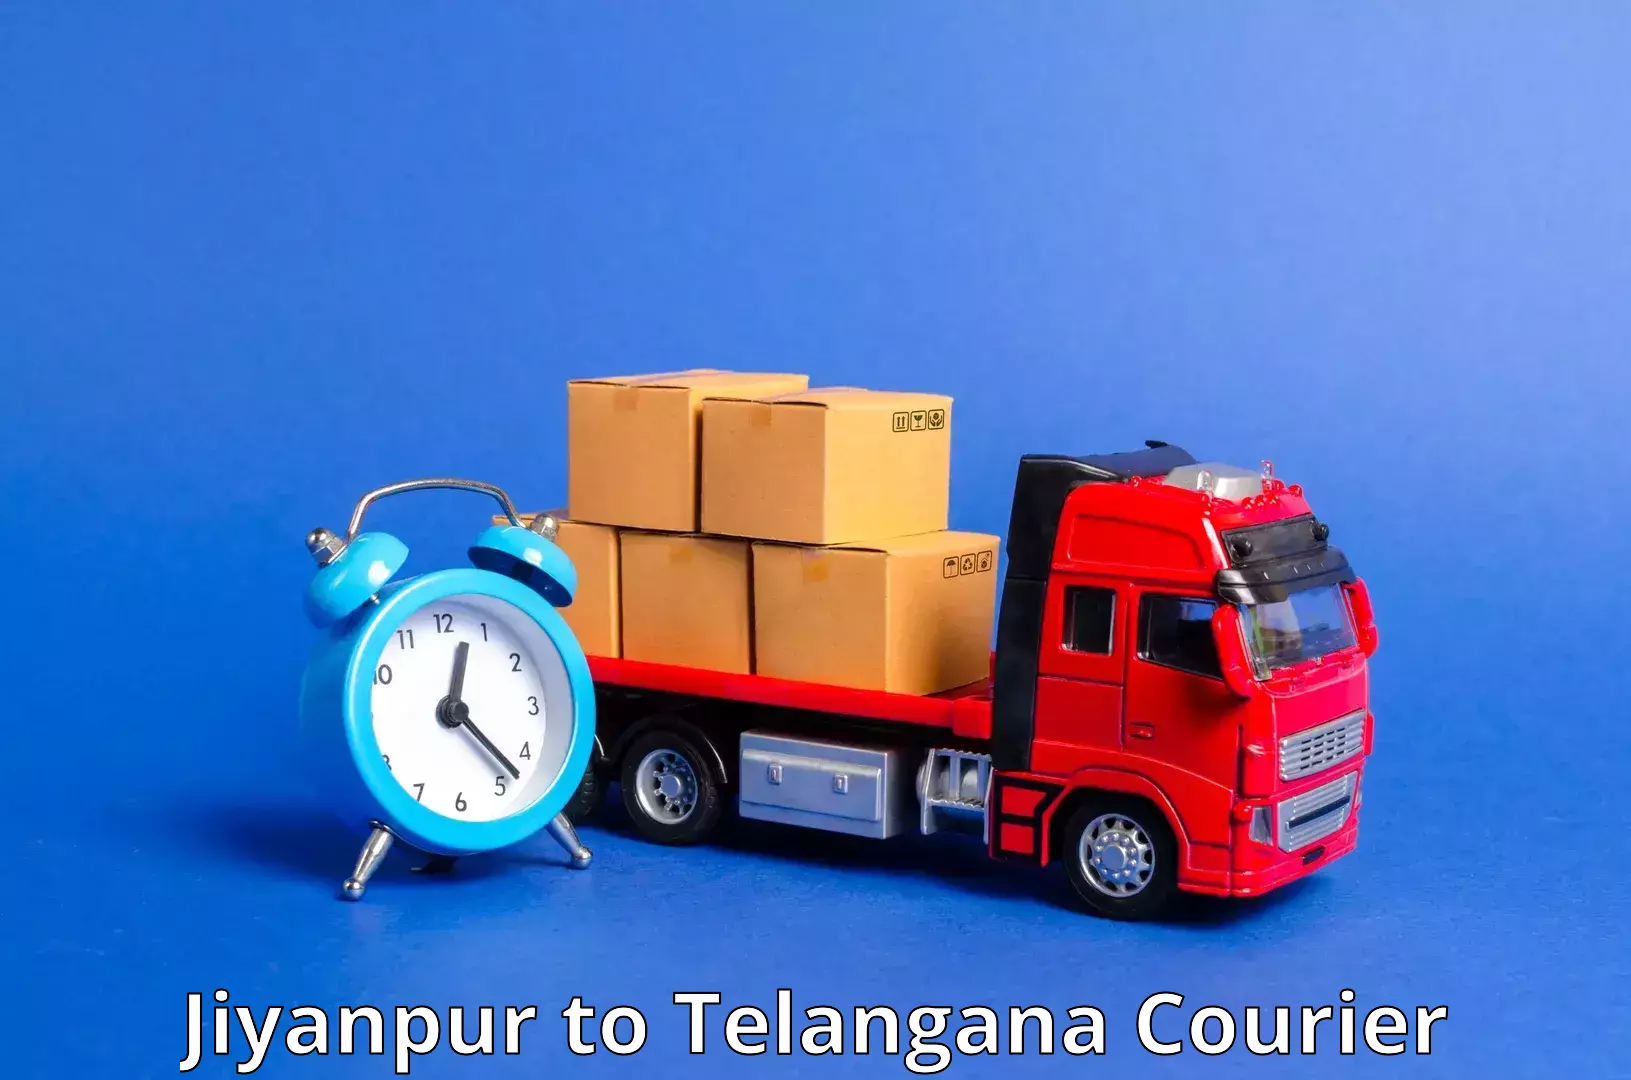 Round-the-clock parcel delivery in Jiyanpur to Asifabad